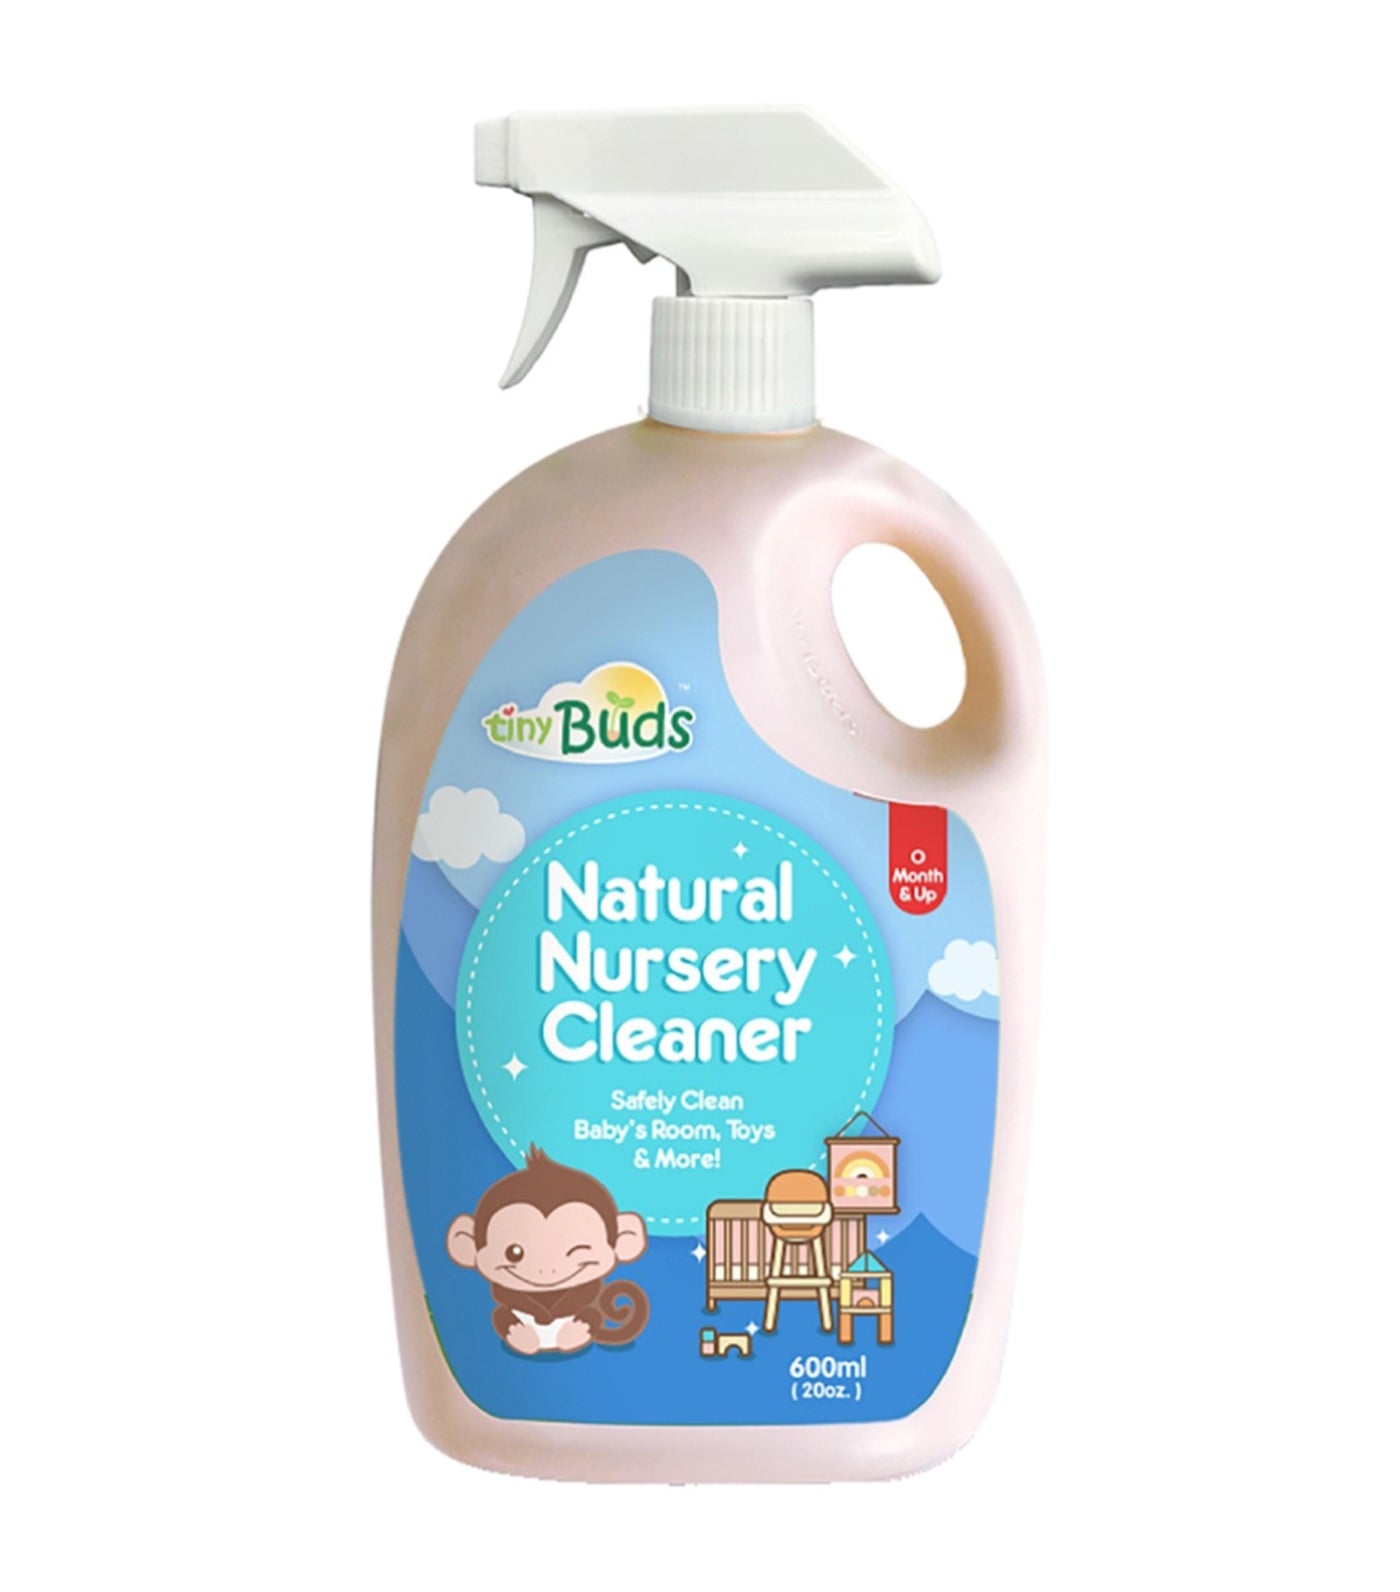 tiny buds natural nursery cleaner bottle 600 ml